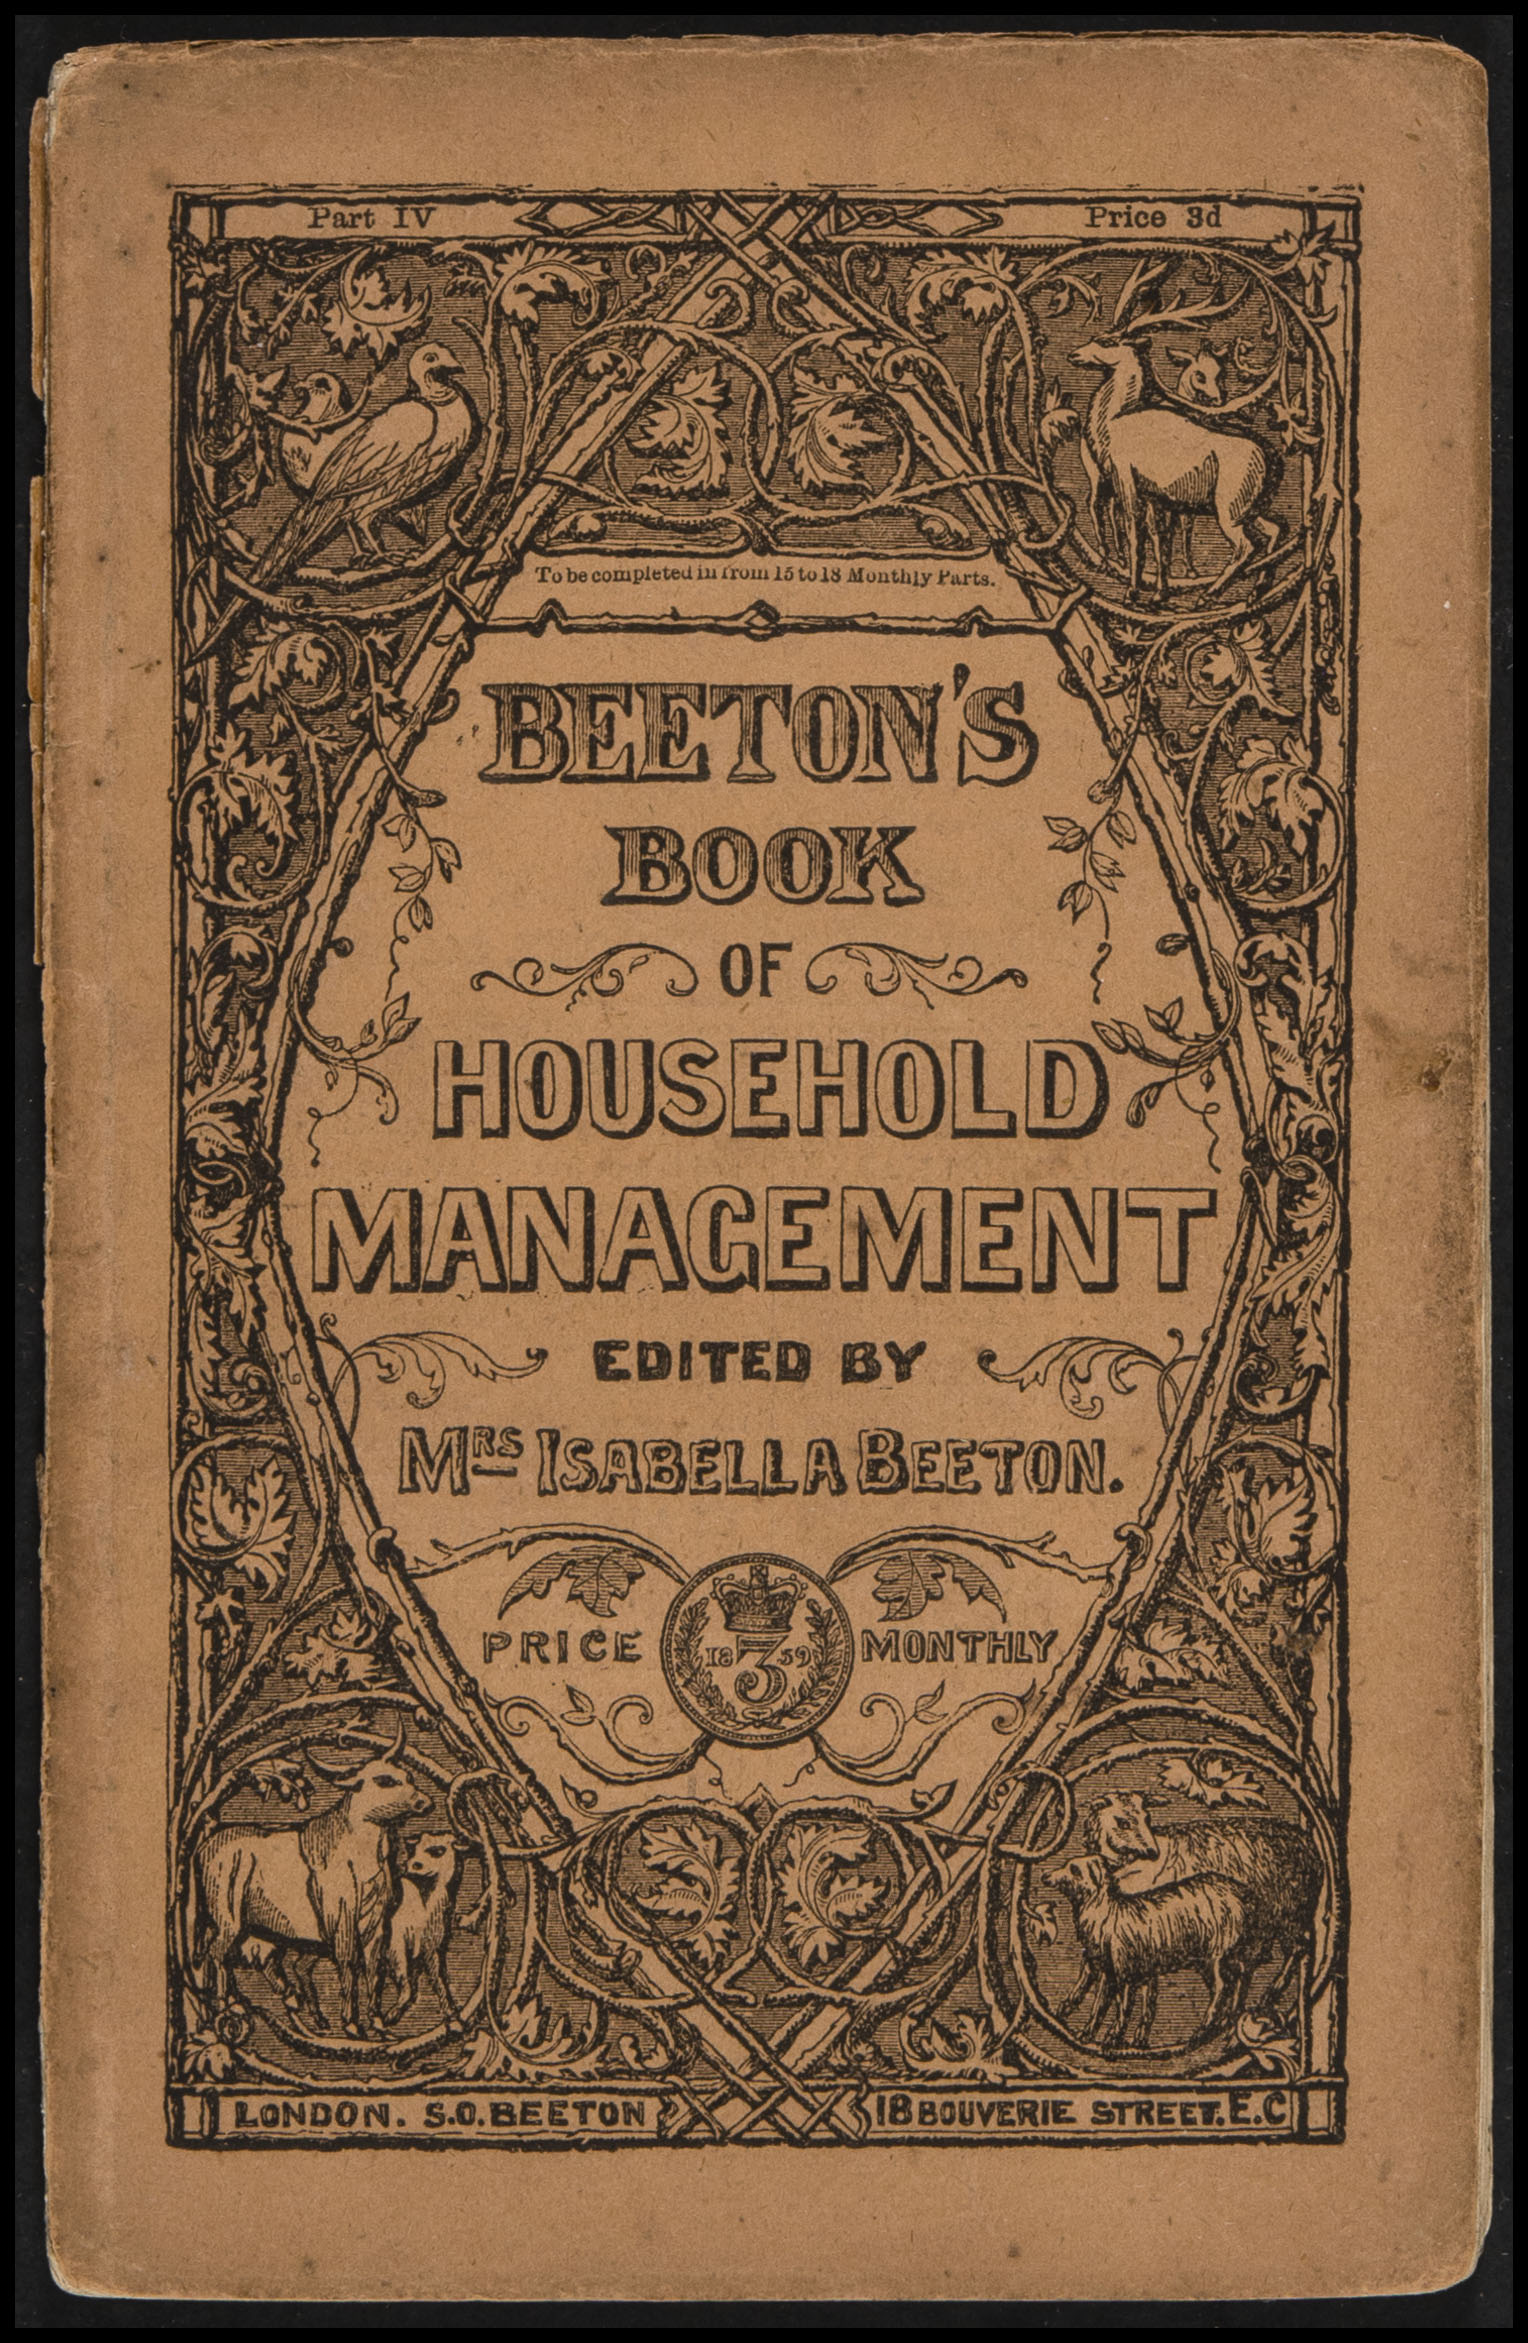 Front cover of Mrs Beeton's Book of Household Management, Part 4 © Material sourced from the University of California, San Diego